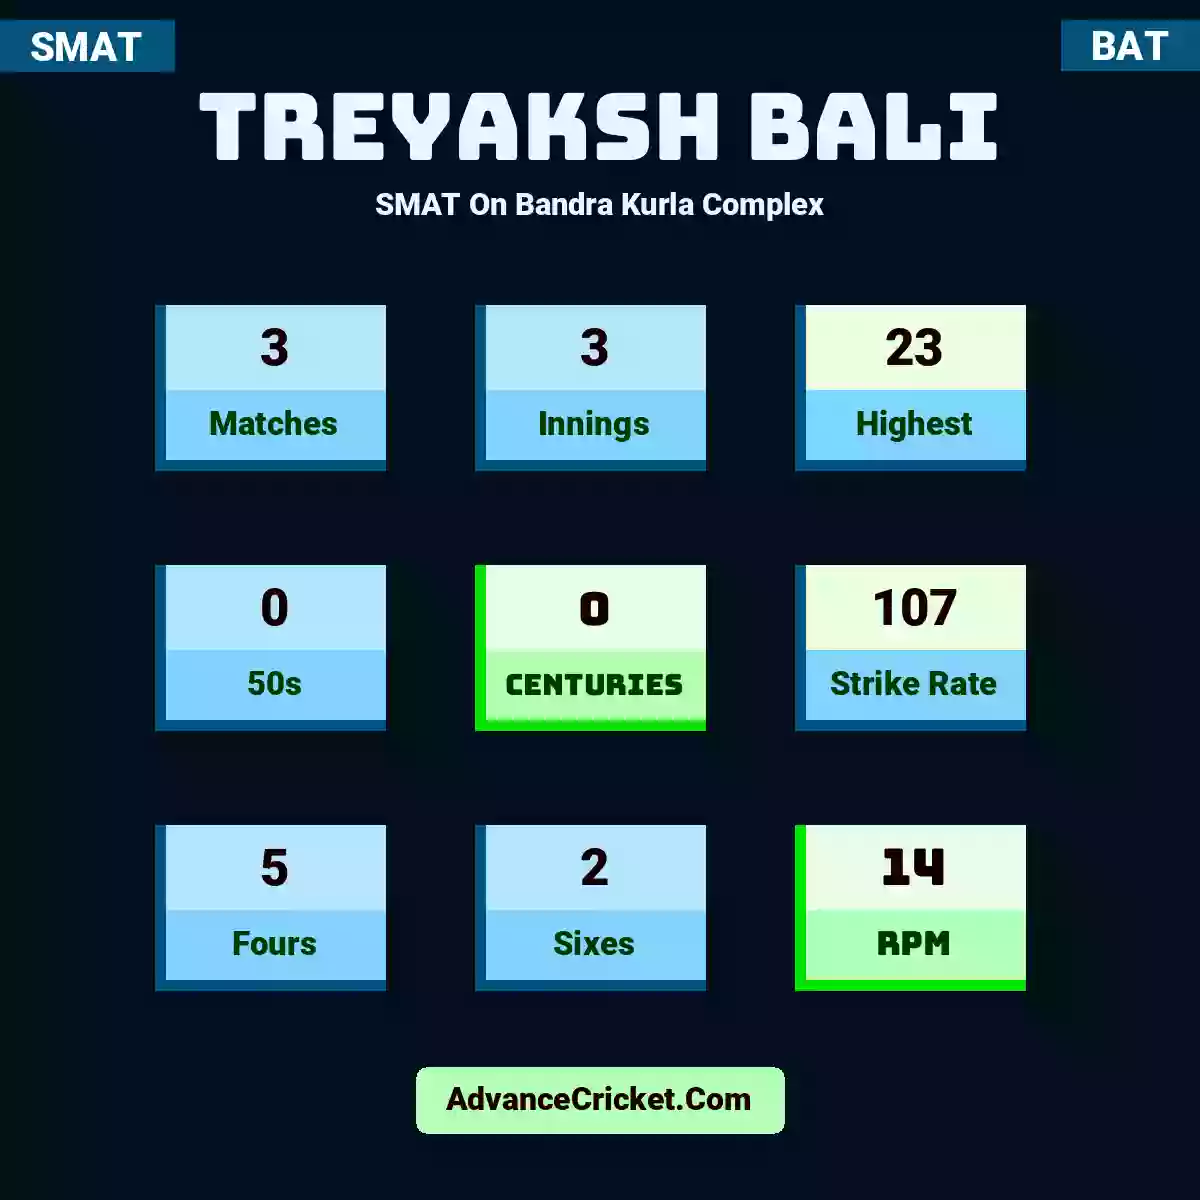 Treyaksh Bali SMAT  On Bandra Kurla Complex, Treyaksh Bali played 3 matches, scored 23 runs as highest, 0 half-centuries, and 0 centuries, with a strike rate of 107. T.Bali hit 5 fours and 2 sixes, with an RPM of 14.